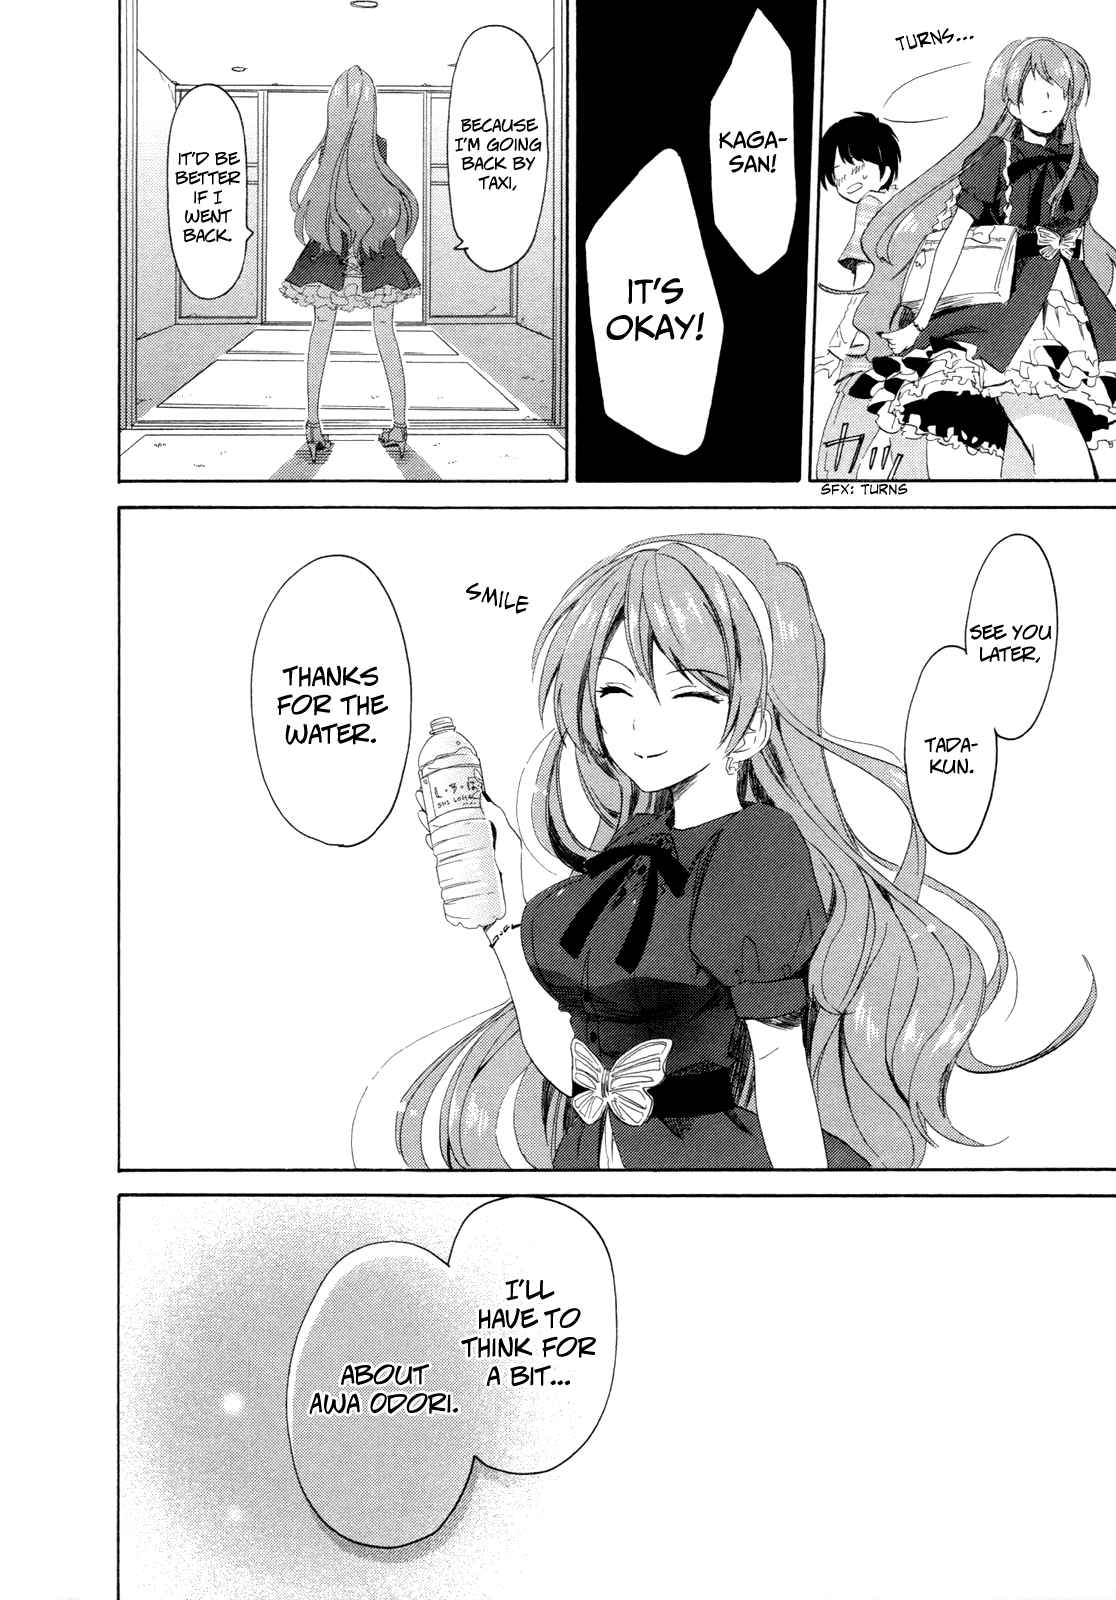 Golden Time Vol. 2 Ch. 8 She's a Fool, but not a Dancing Fool